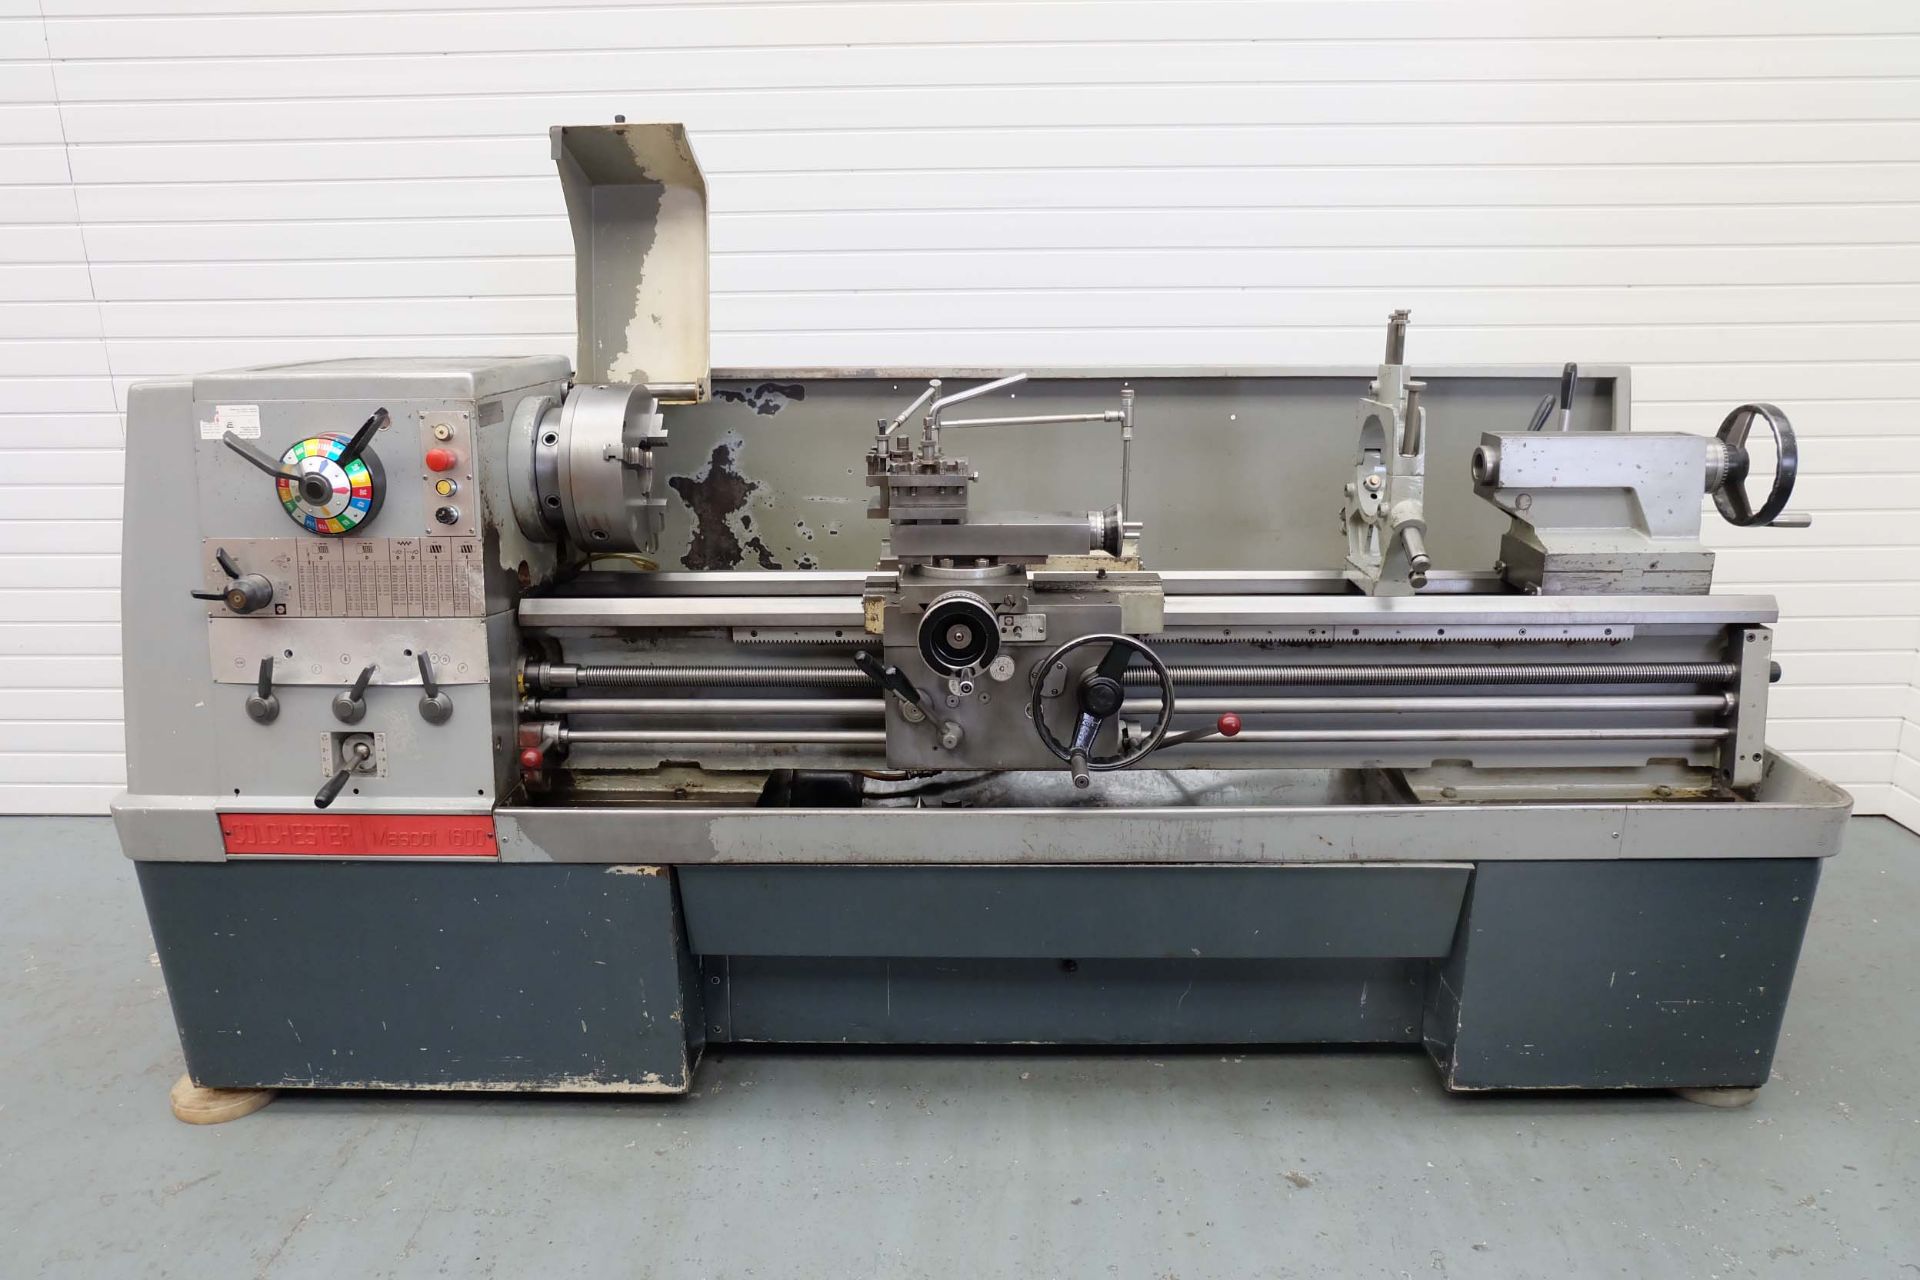 Colchester Mascot 1600 Straight Bed Centre Lathe. Height of Centres 8 1/2".